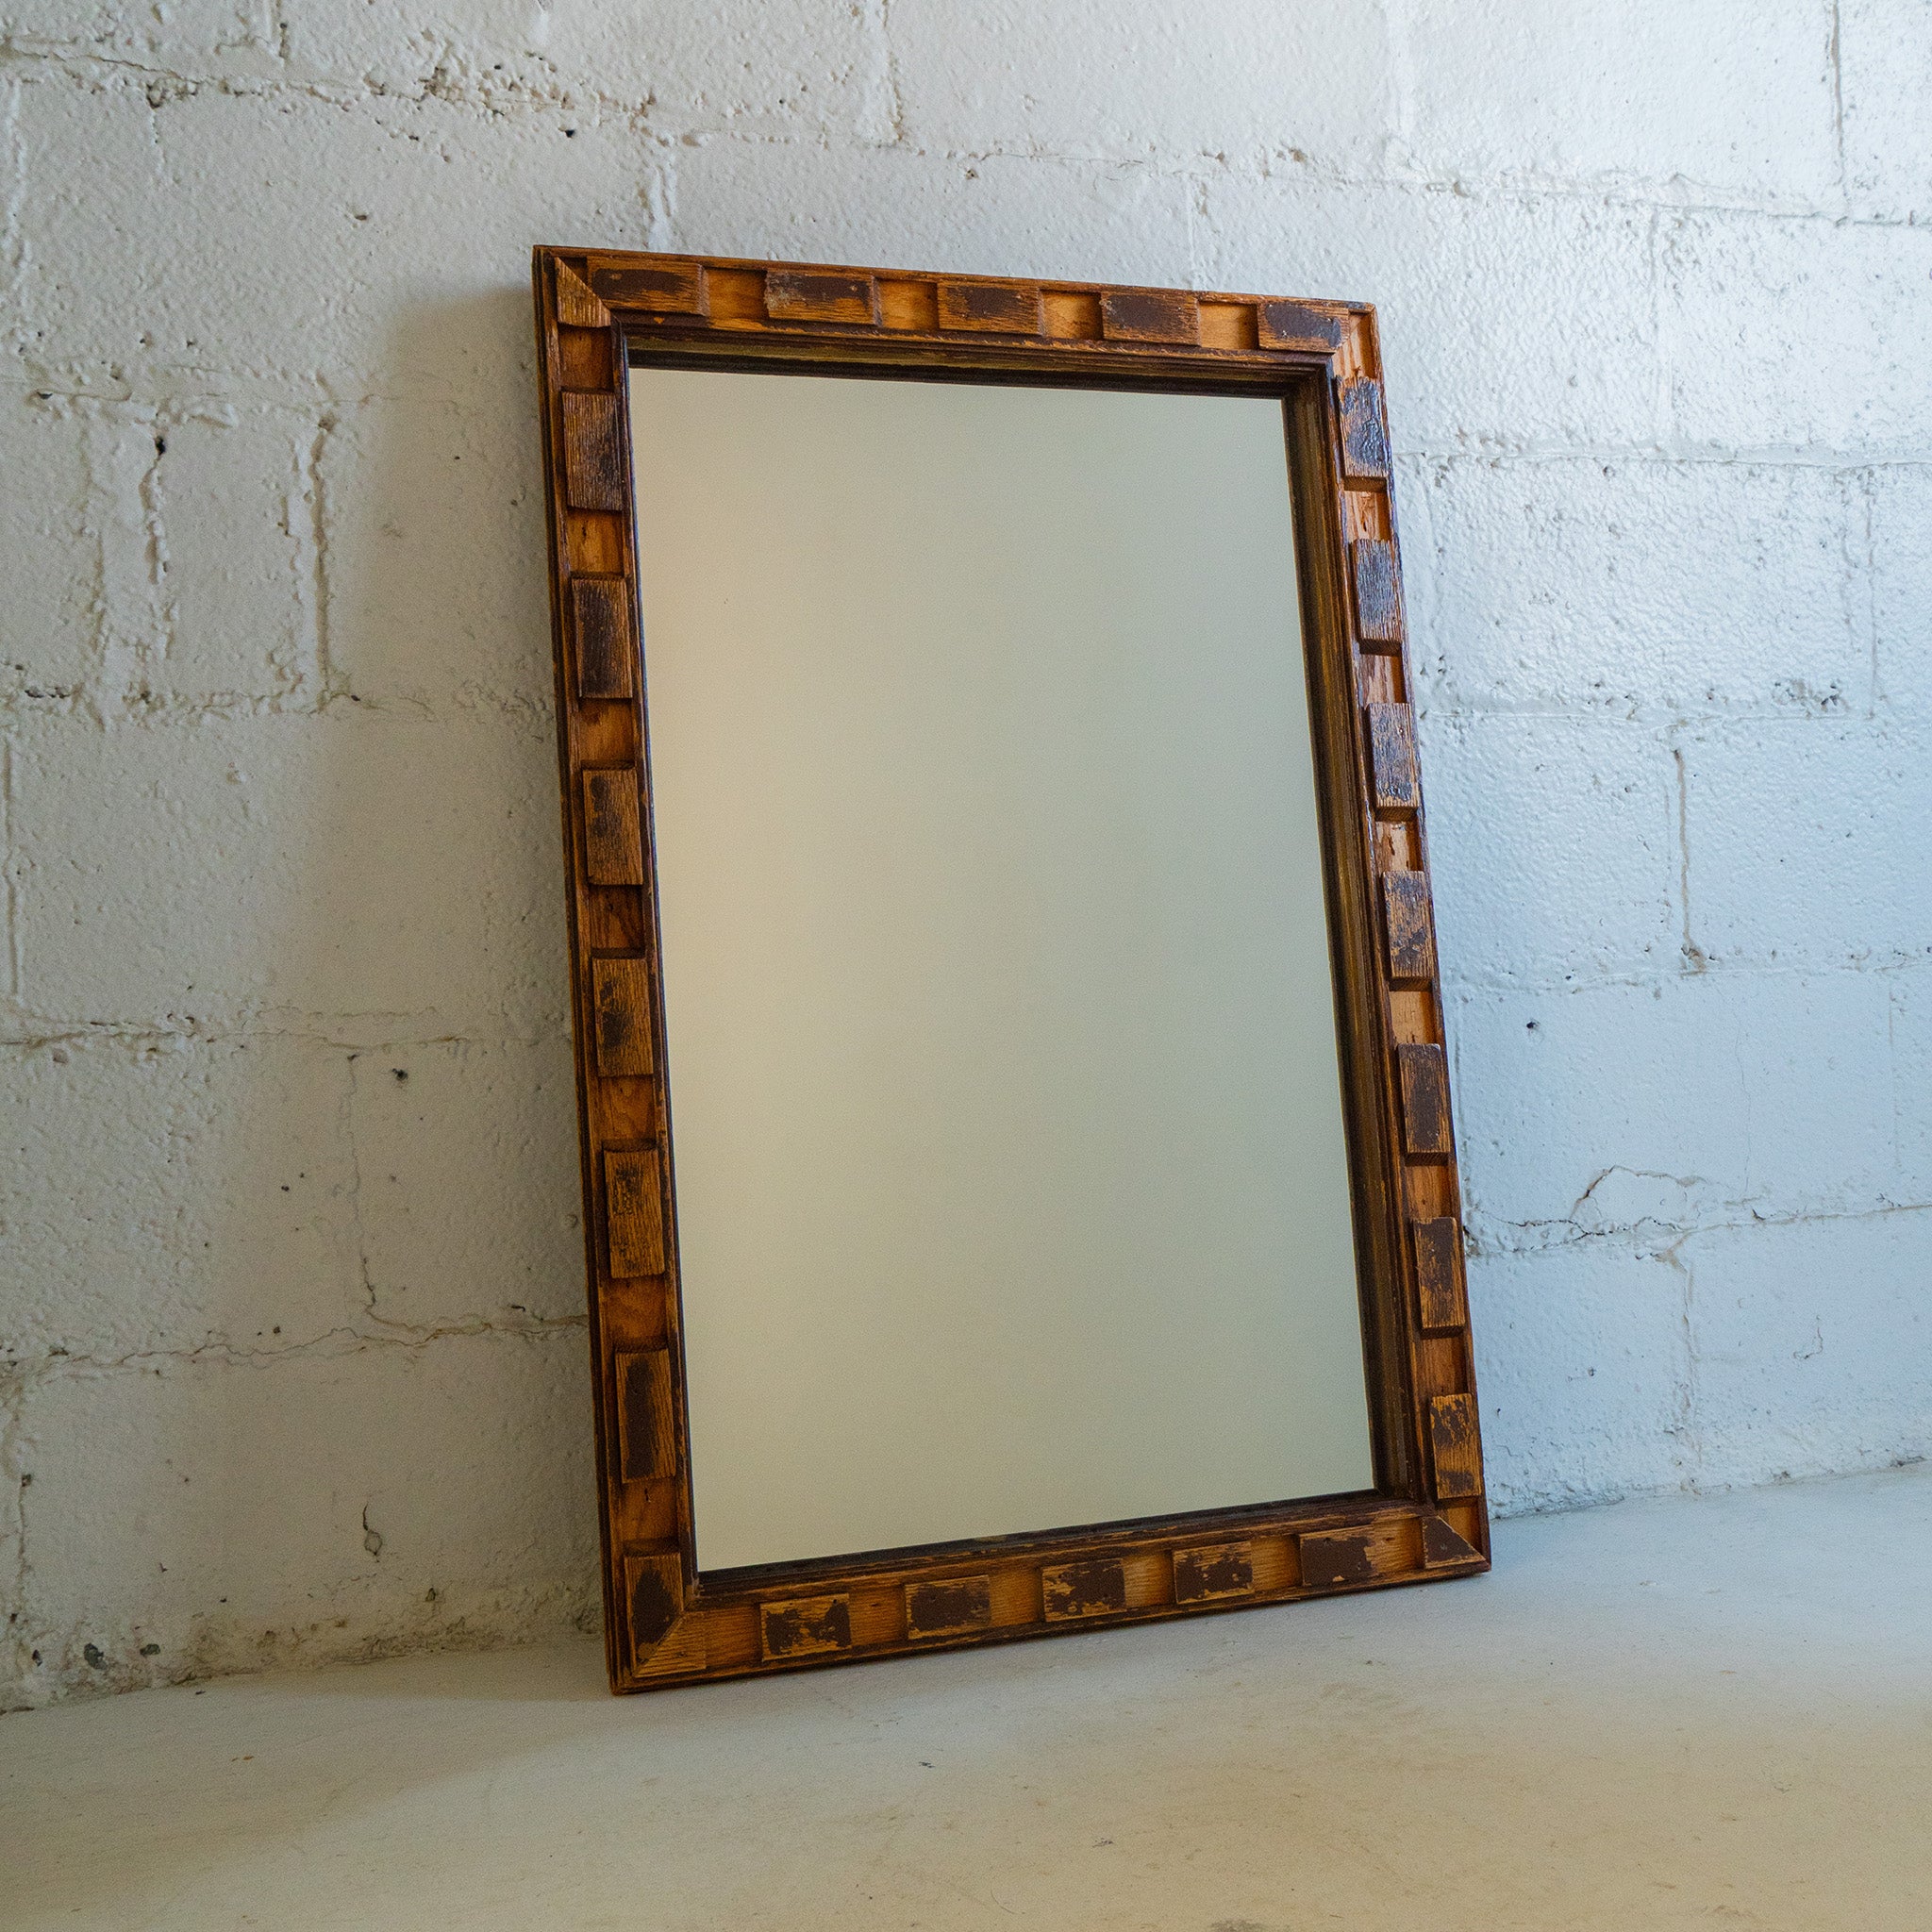 handrail mirror tabletop front view reclaimed wood